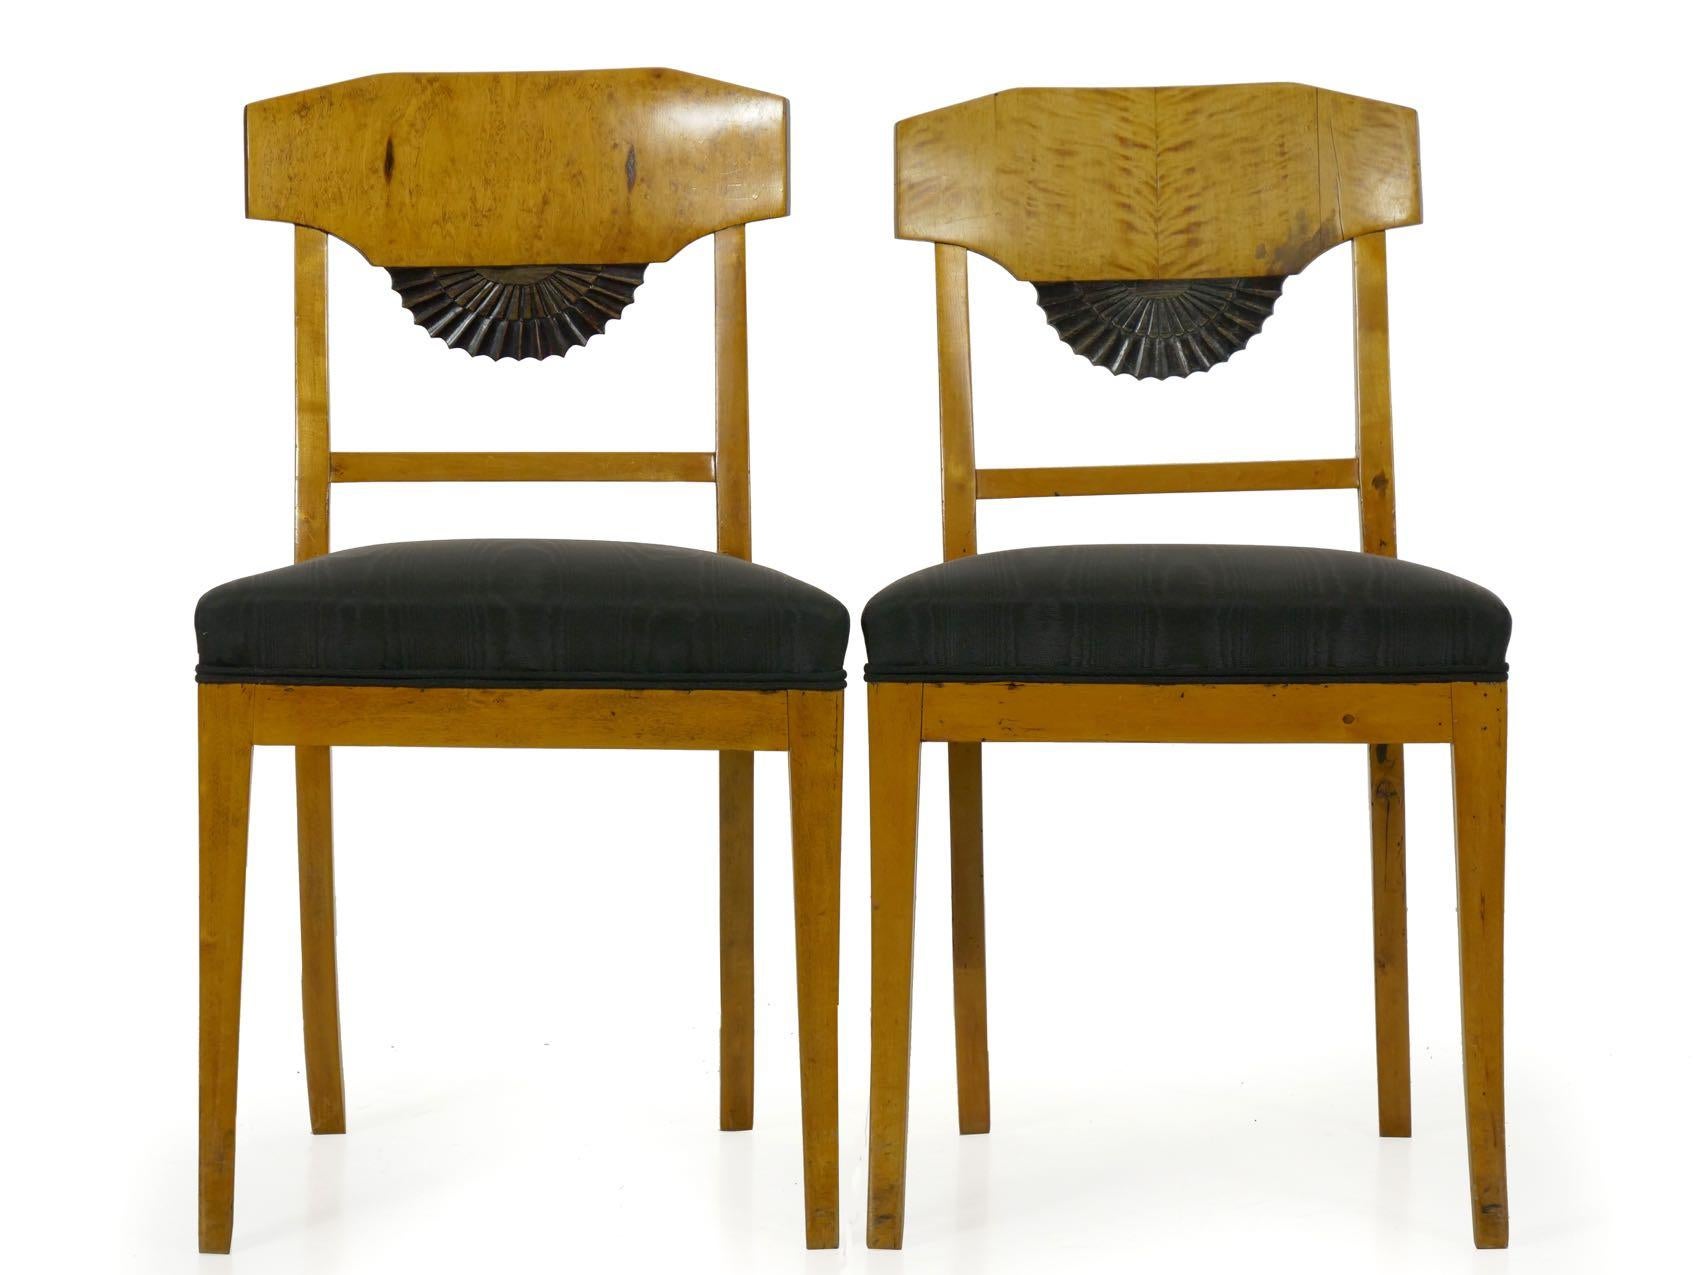 An incredibly attractive pair of Biedermeier style side chairs, they are crafted of birch with finely veneered crest rails of the same over fan-carved ebony stained embellishments in the splat. Probably from the last quarter of the 19th century, the